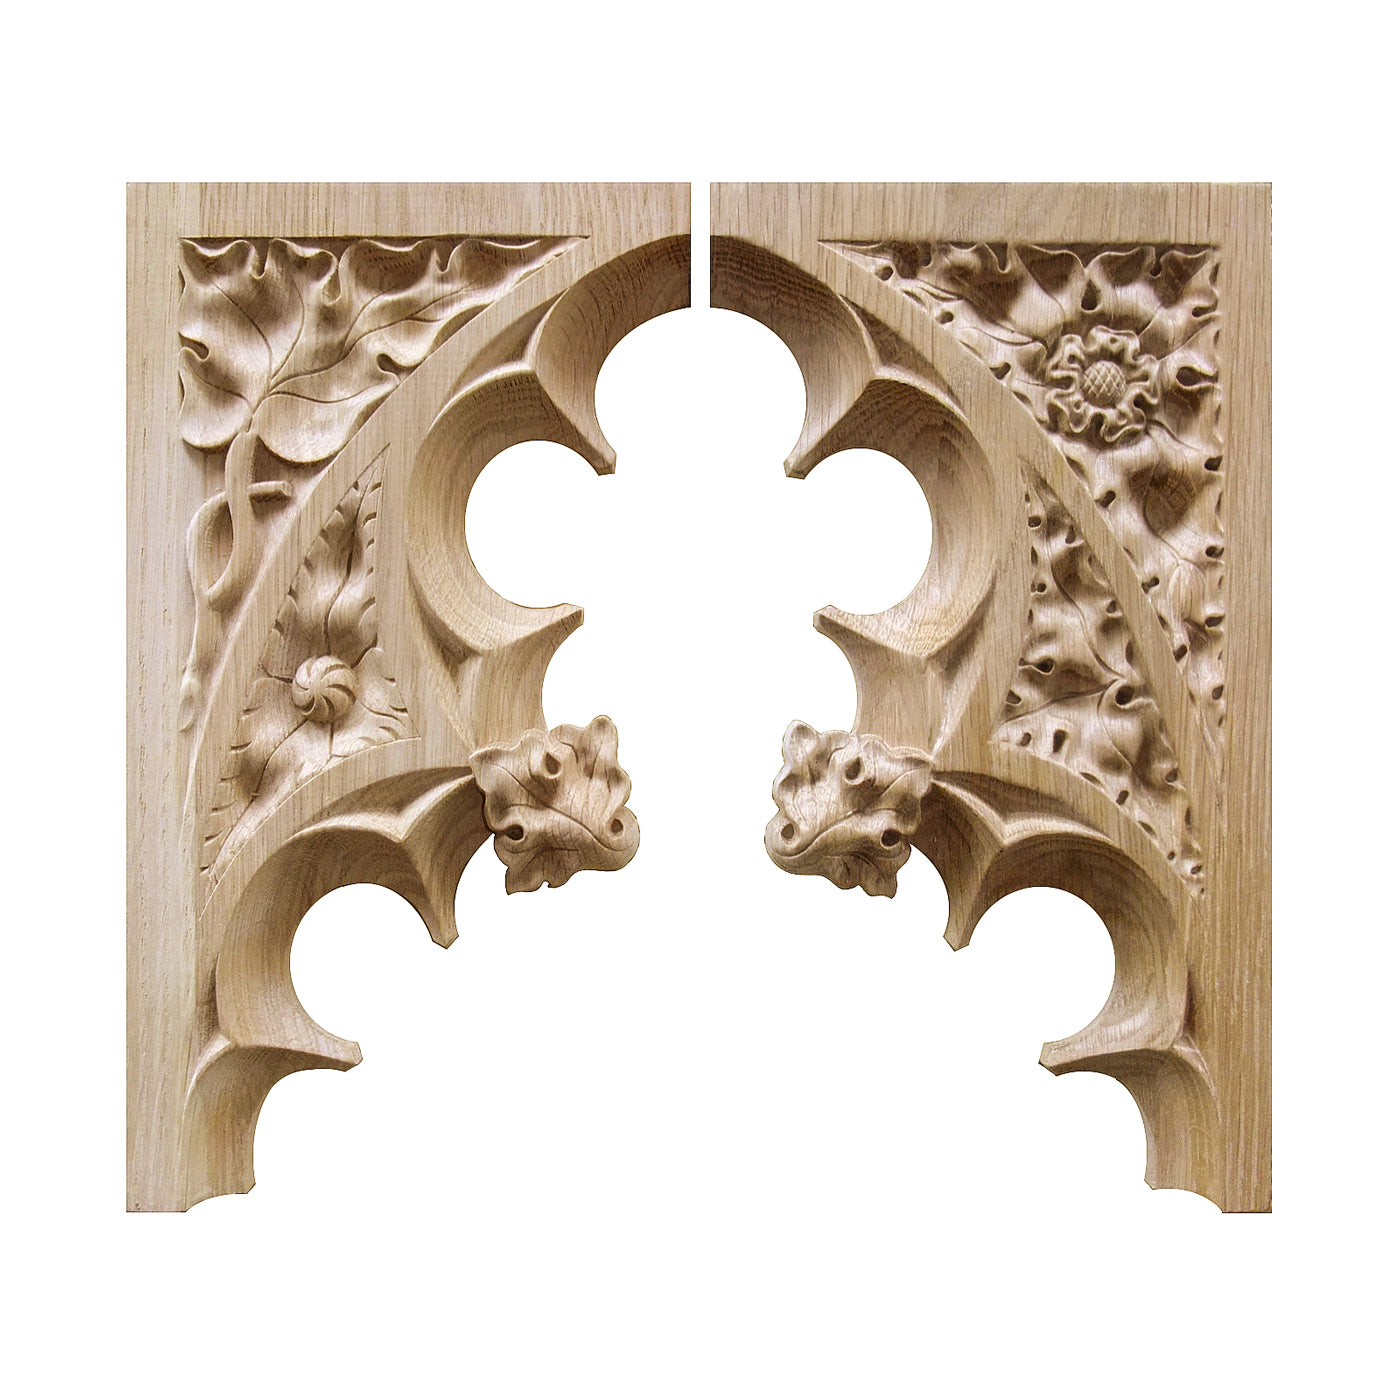 PAIR of PNL-37 Gothic Style Vine and Rose Carved Arch Panels